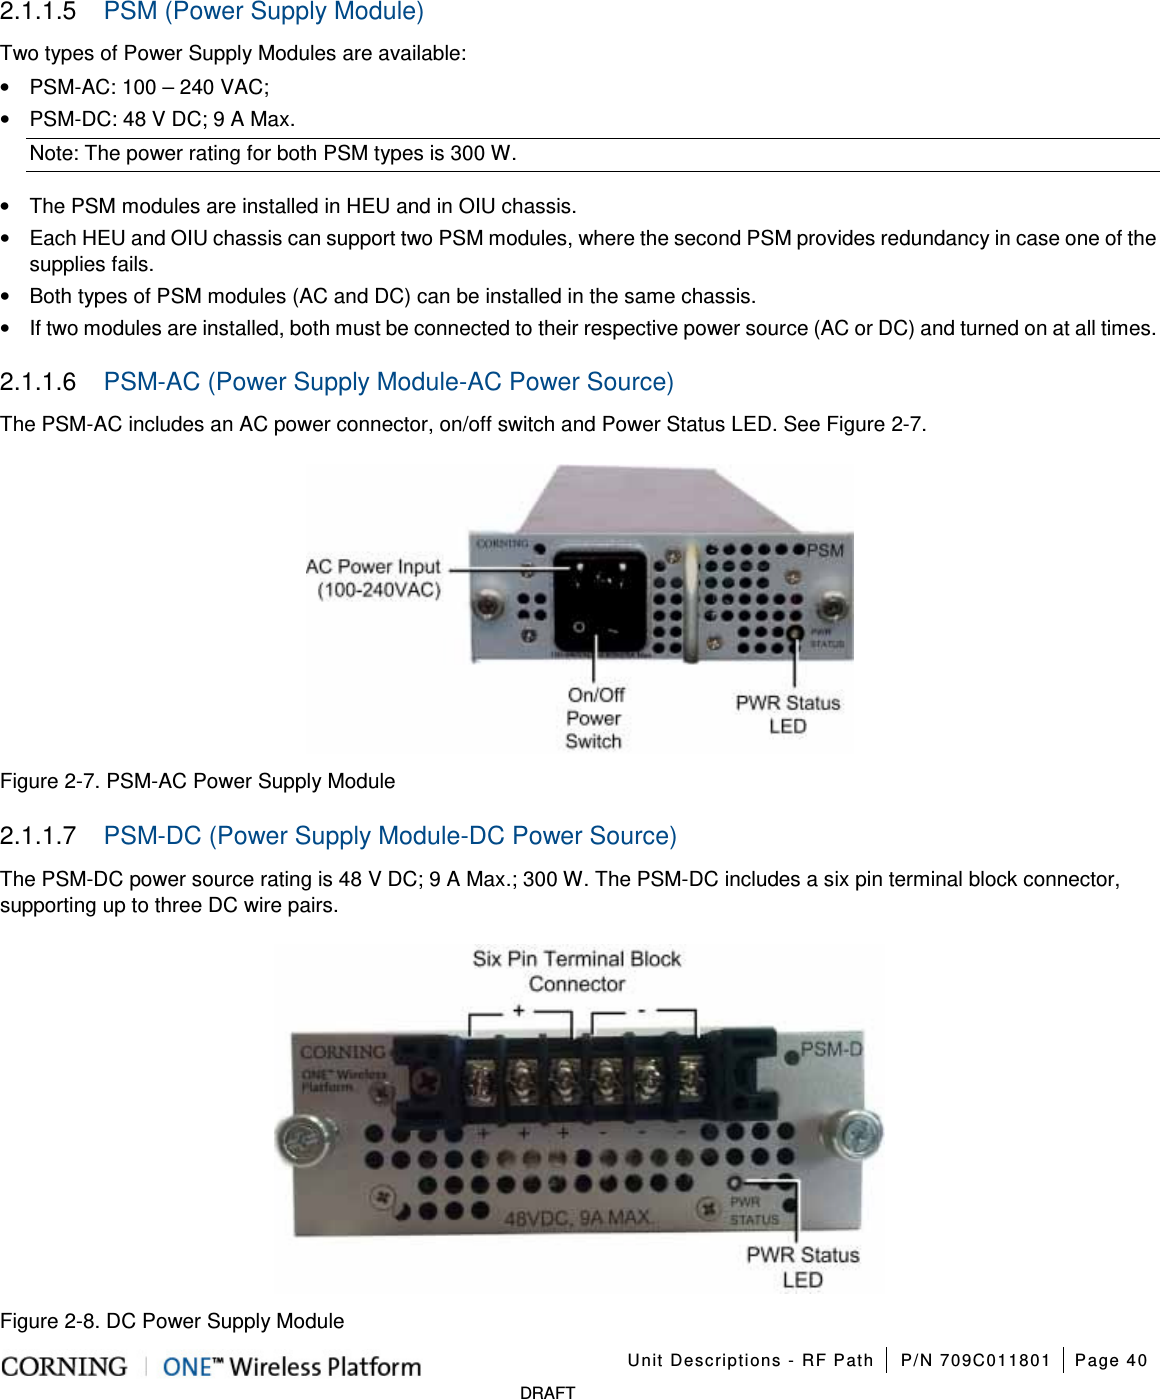    Unit Descriptions - RF Path P/N 709C011801 Page 40   DRAFT 2.1.1.5  PSM (Power Supply Module) Two types of Power Supply Modules are available: • PSM-AC: 100 – 240 VAC;   • PSM-DC: 48 V DC; 9 A Max. Note: The power rating for both PSM types is 300 W. • The PSM modules are installed in HEU and in OIU chassis. • Each HEU and OIU chassis can support two PSM modules, where the second PSM provides redundancy in case one of the supplies fails. • Both types of PSM modules (AC and DC) can be installed in the same chassis. • If two modules are installed, both must be connected to their respective power source (AC or DC) and turned on at all times. 2.1.1.6  PSM-AC (Power Supply Module-AC Power Source) The PSM-AC includes an AC power connector, on/off switch and Power Status LED. See Figure  2-7.  Figure  2-7. PSM-AC Power Supply Module 2.1.1.7  PSM-DC (Power Supply Module-DC Power Source) The PSM-DC power source rating is 48 V DC; 9 A Max.; 300 W. The PSM-DC includes a six pin terminal block connector, supporting up to three DC wire pairs.    Figure  2-8. DC Power Supply Module 